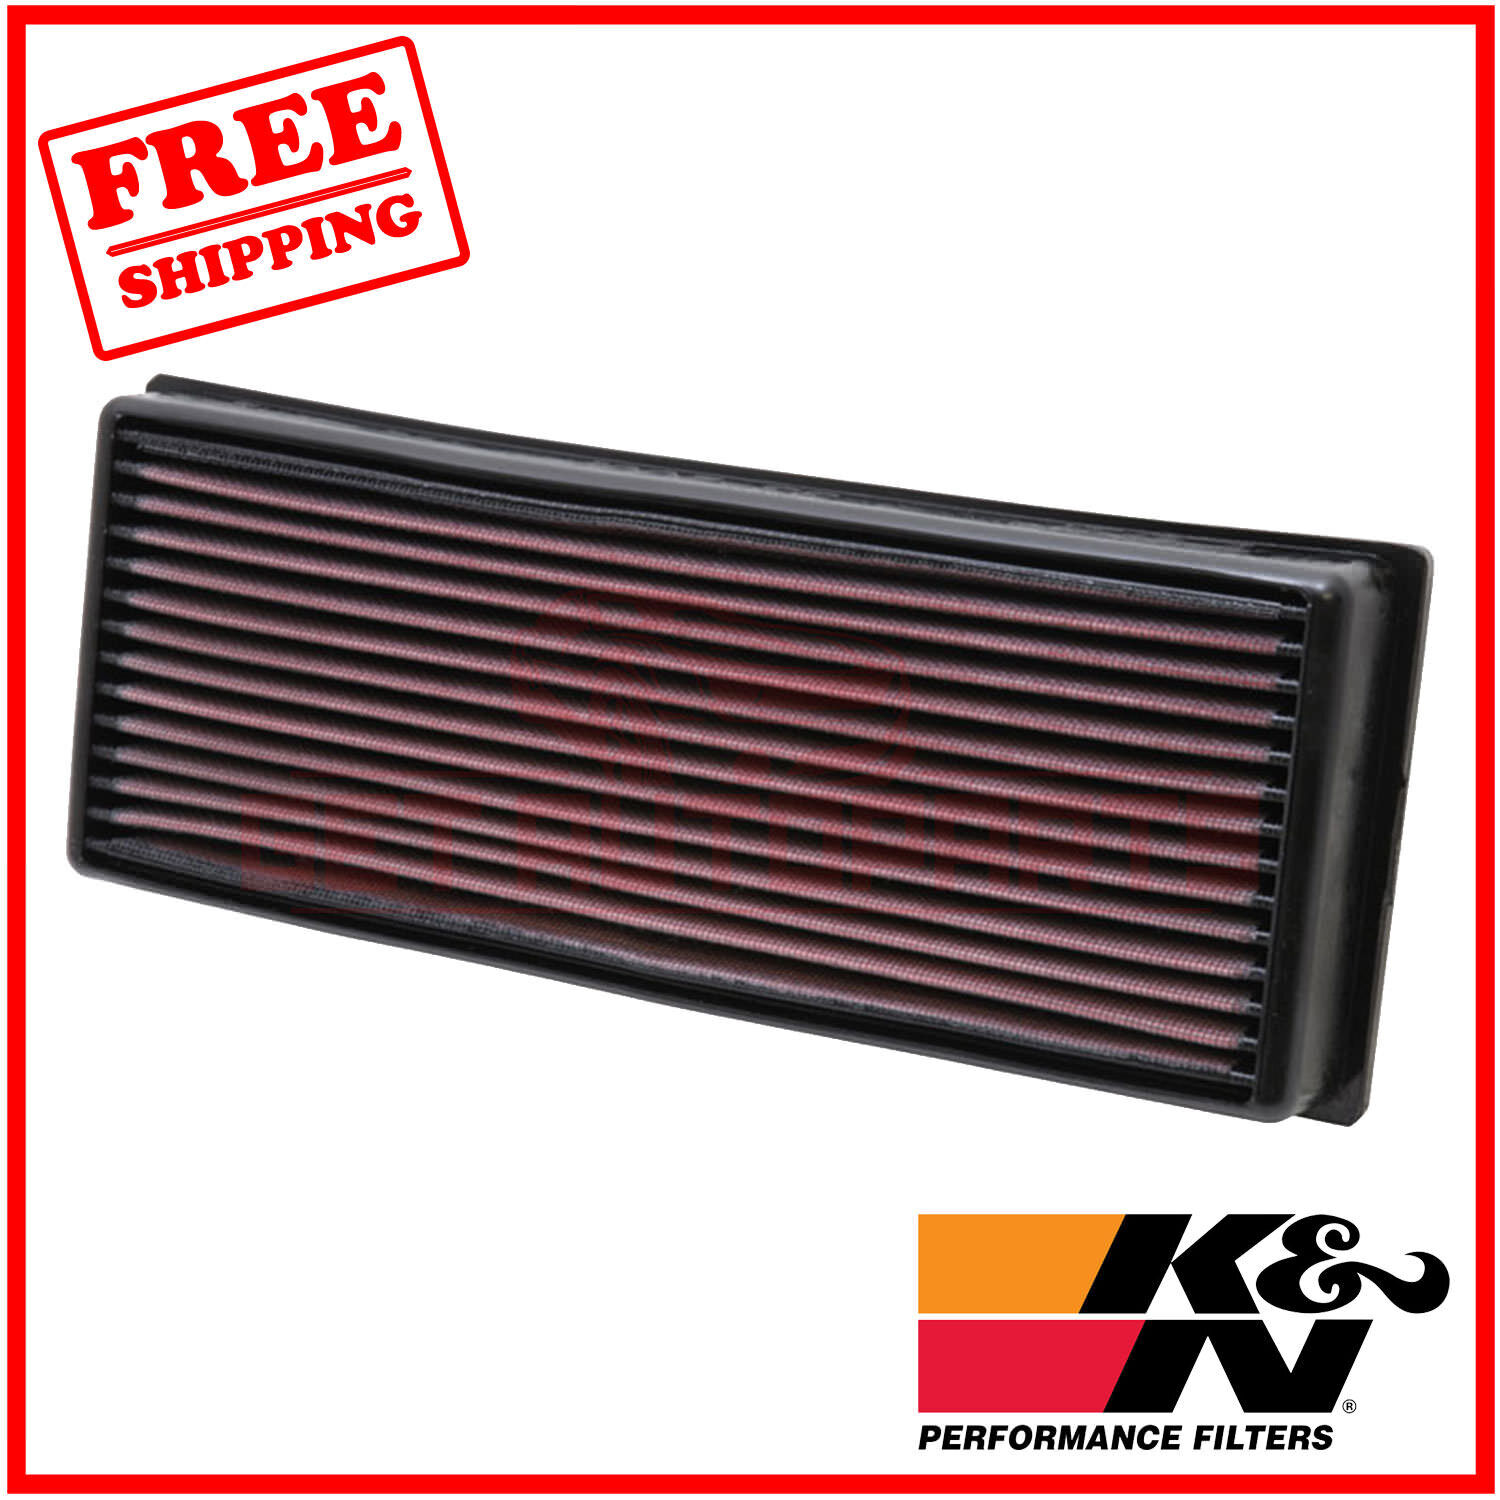 K&N Replacement Air Filter for Dodge Monaco 1990